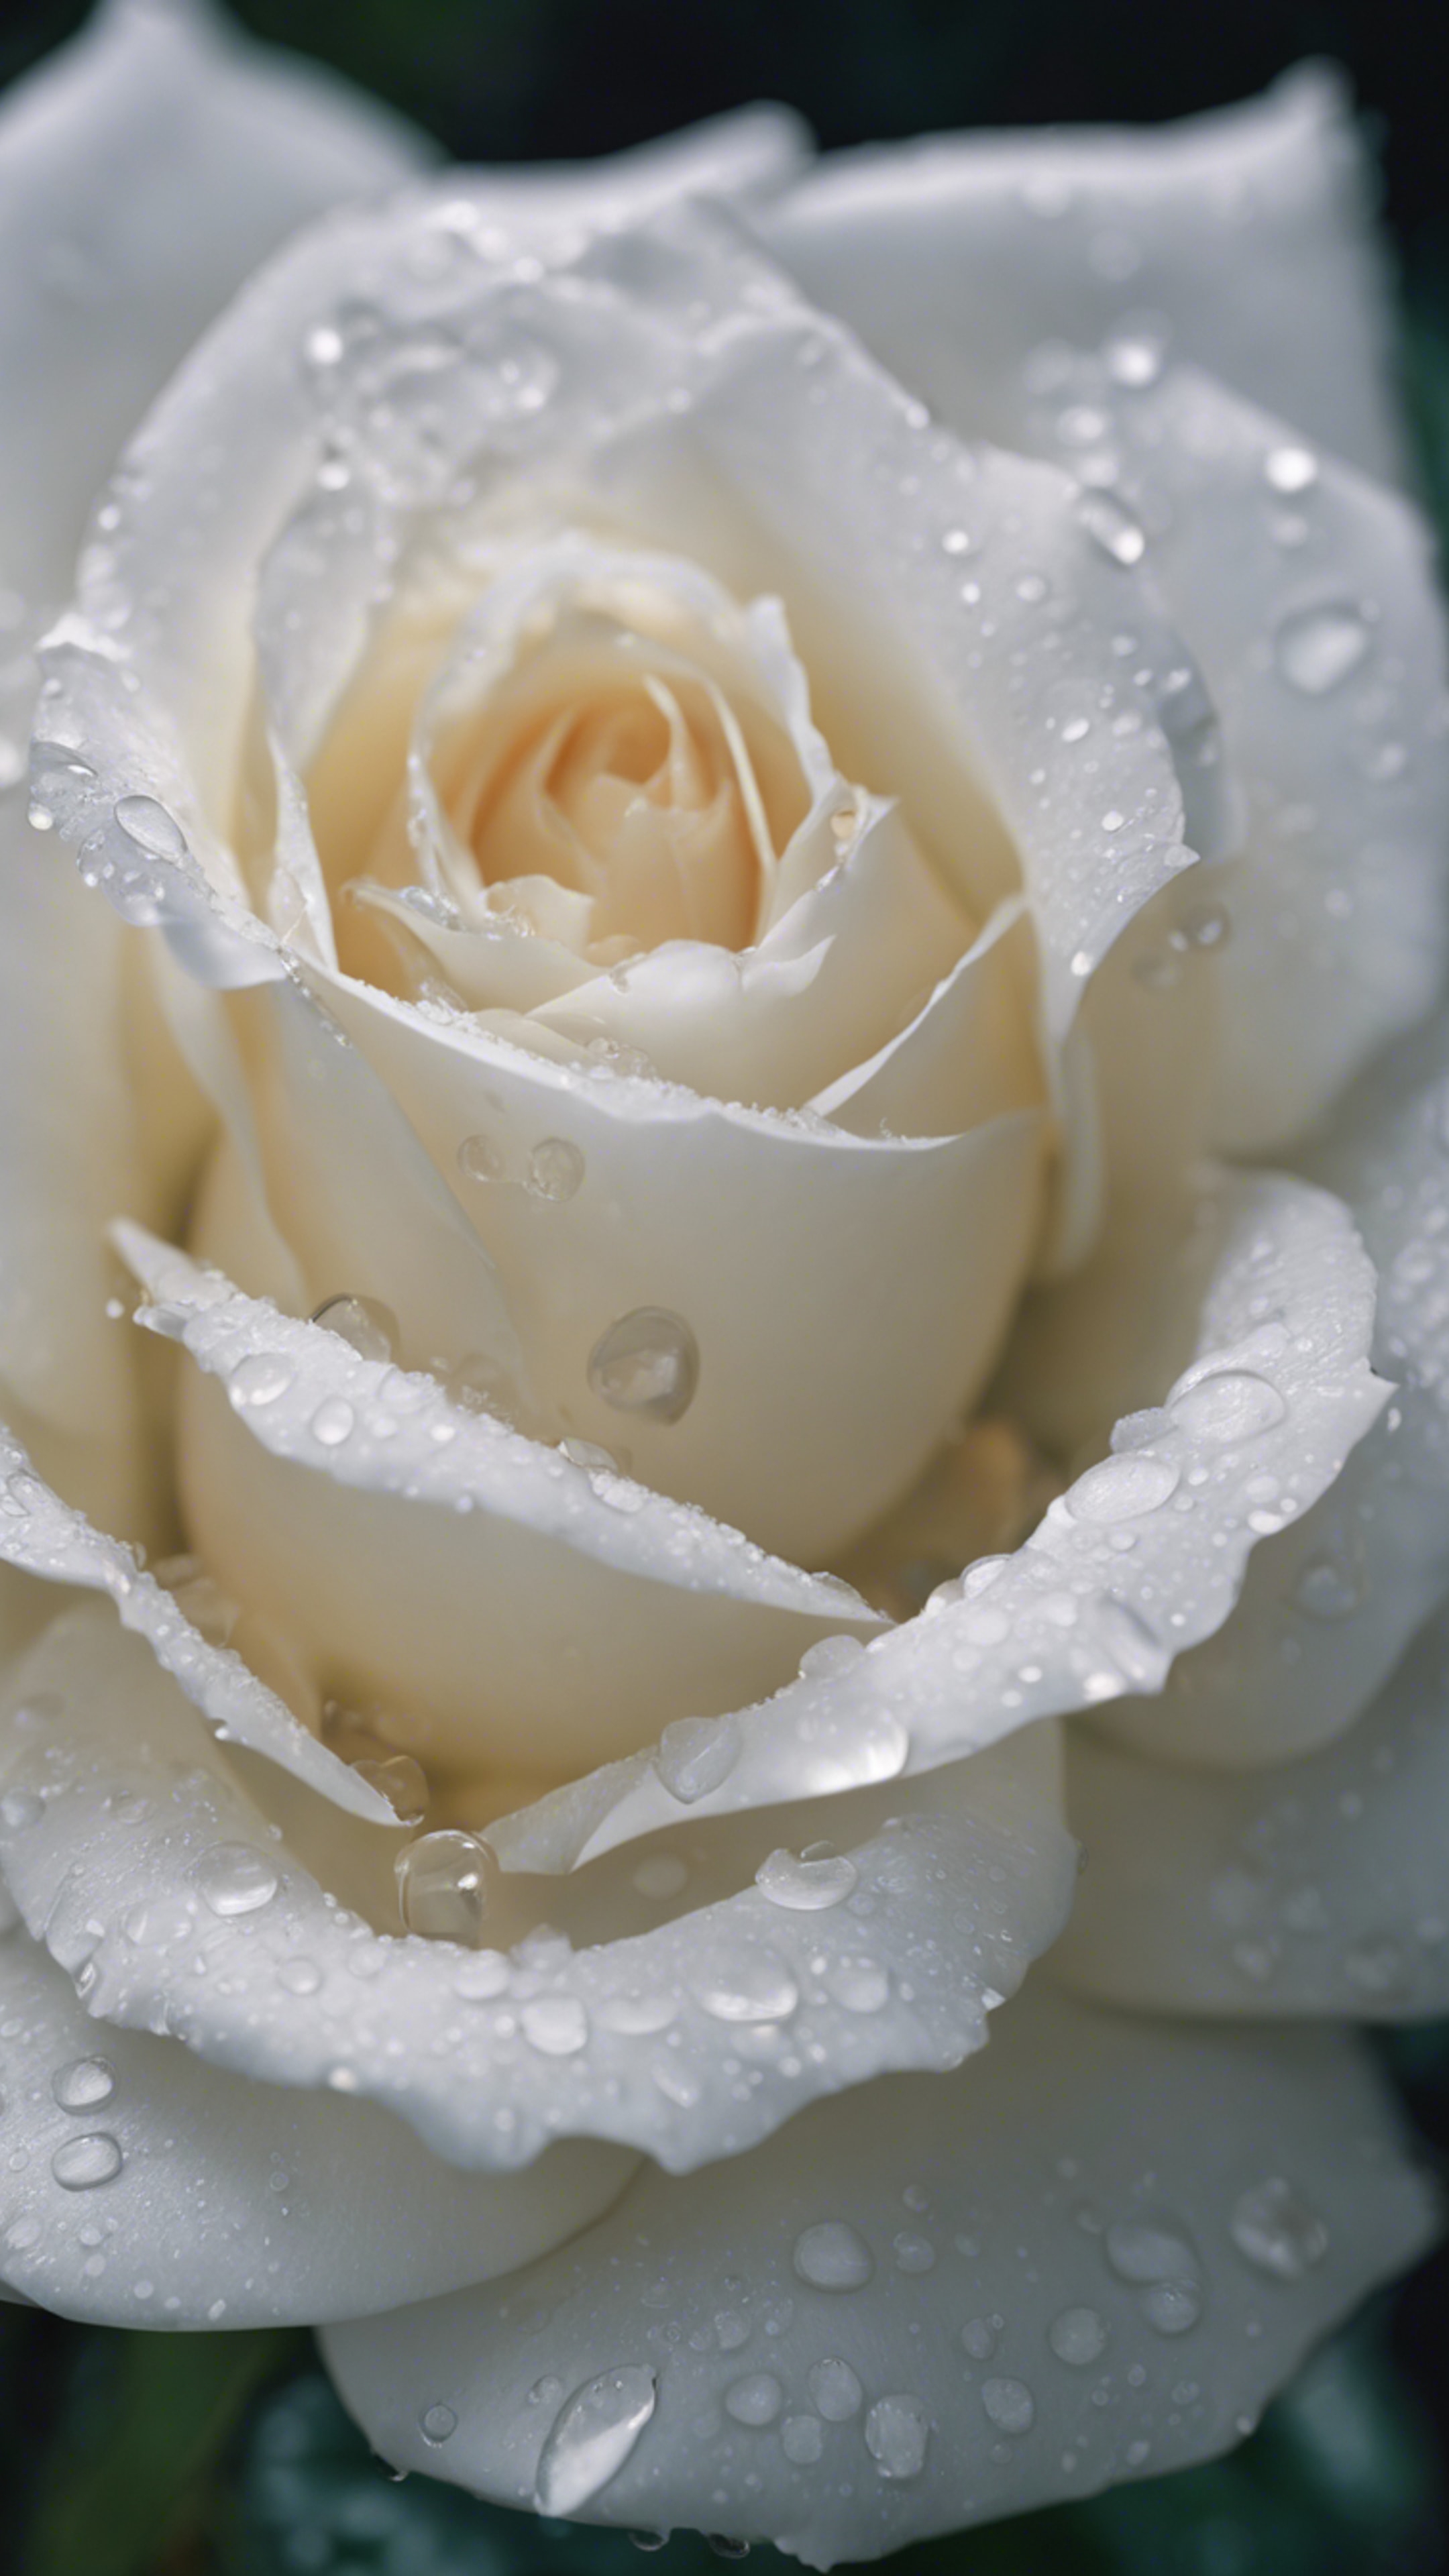 Close-up of a white rose in full bloom, a droplet of water hanging off one petal. Wallpaper[2daa22f287134494a68f]